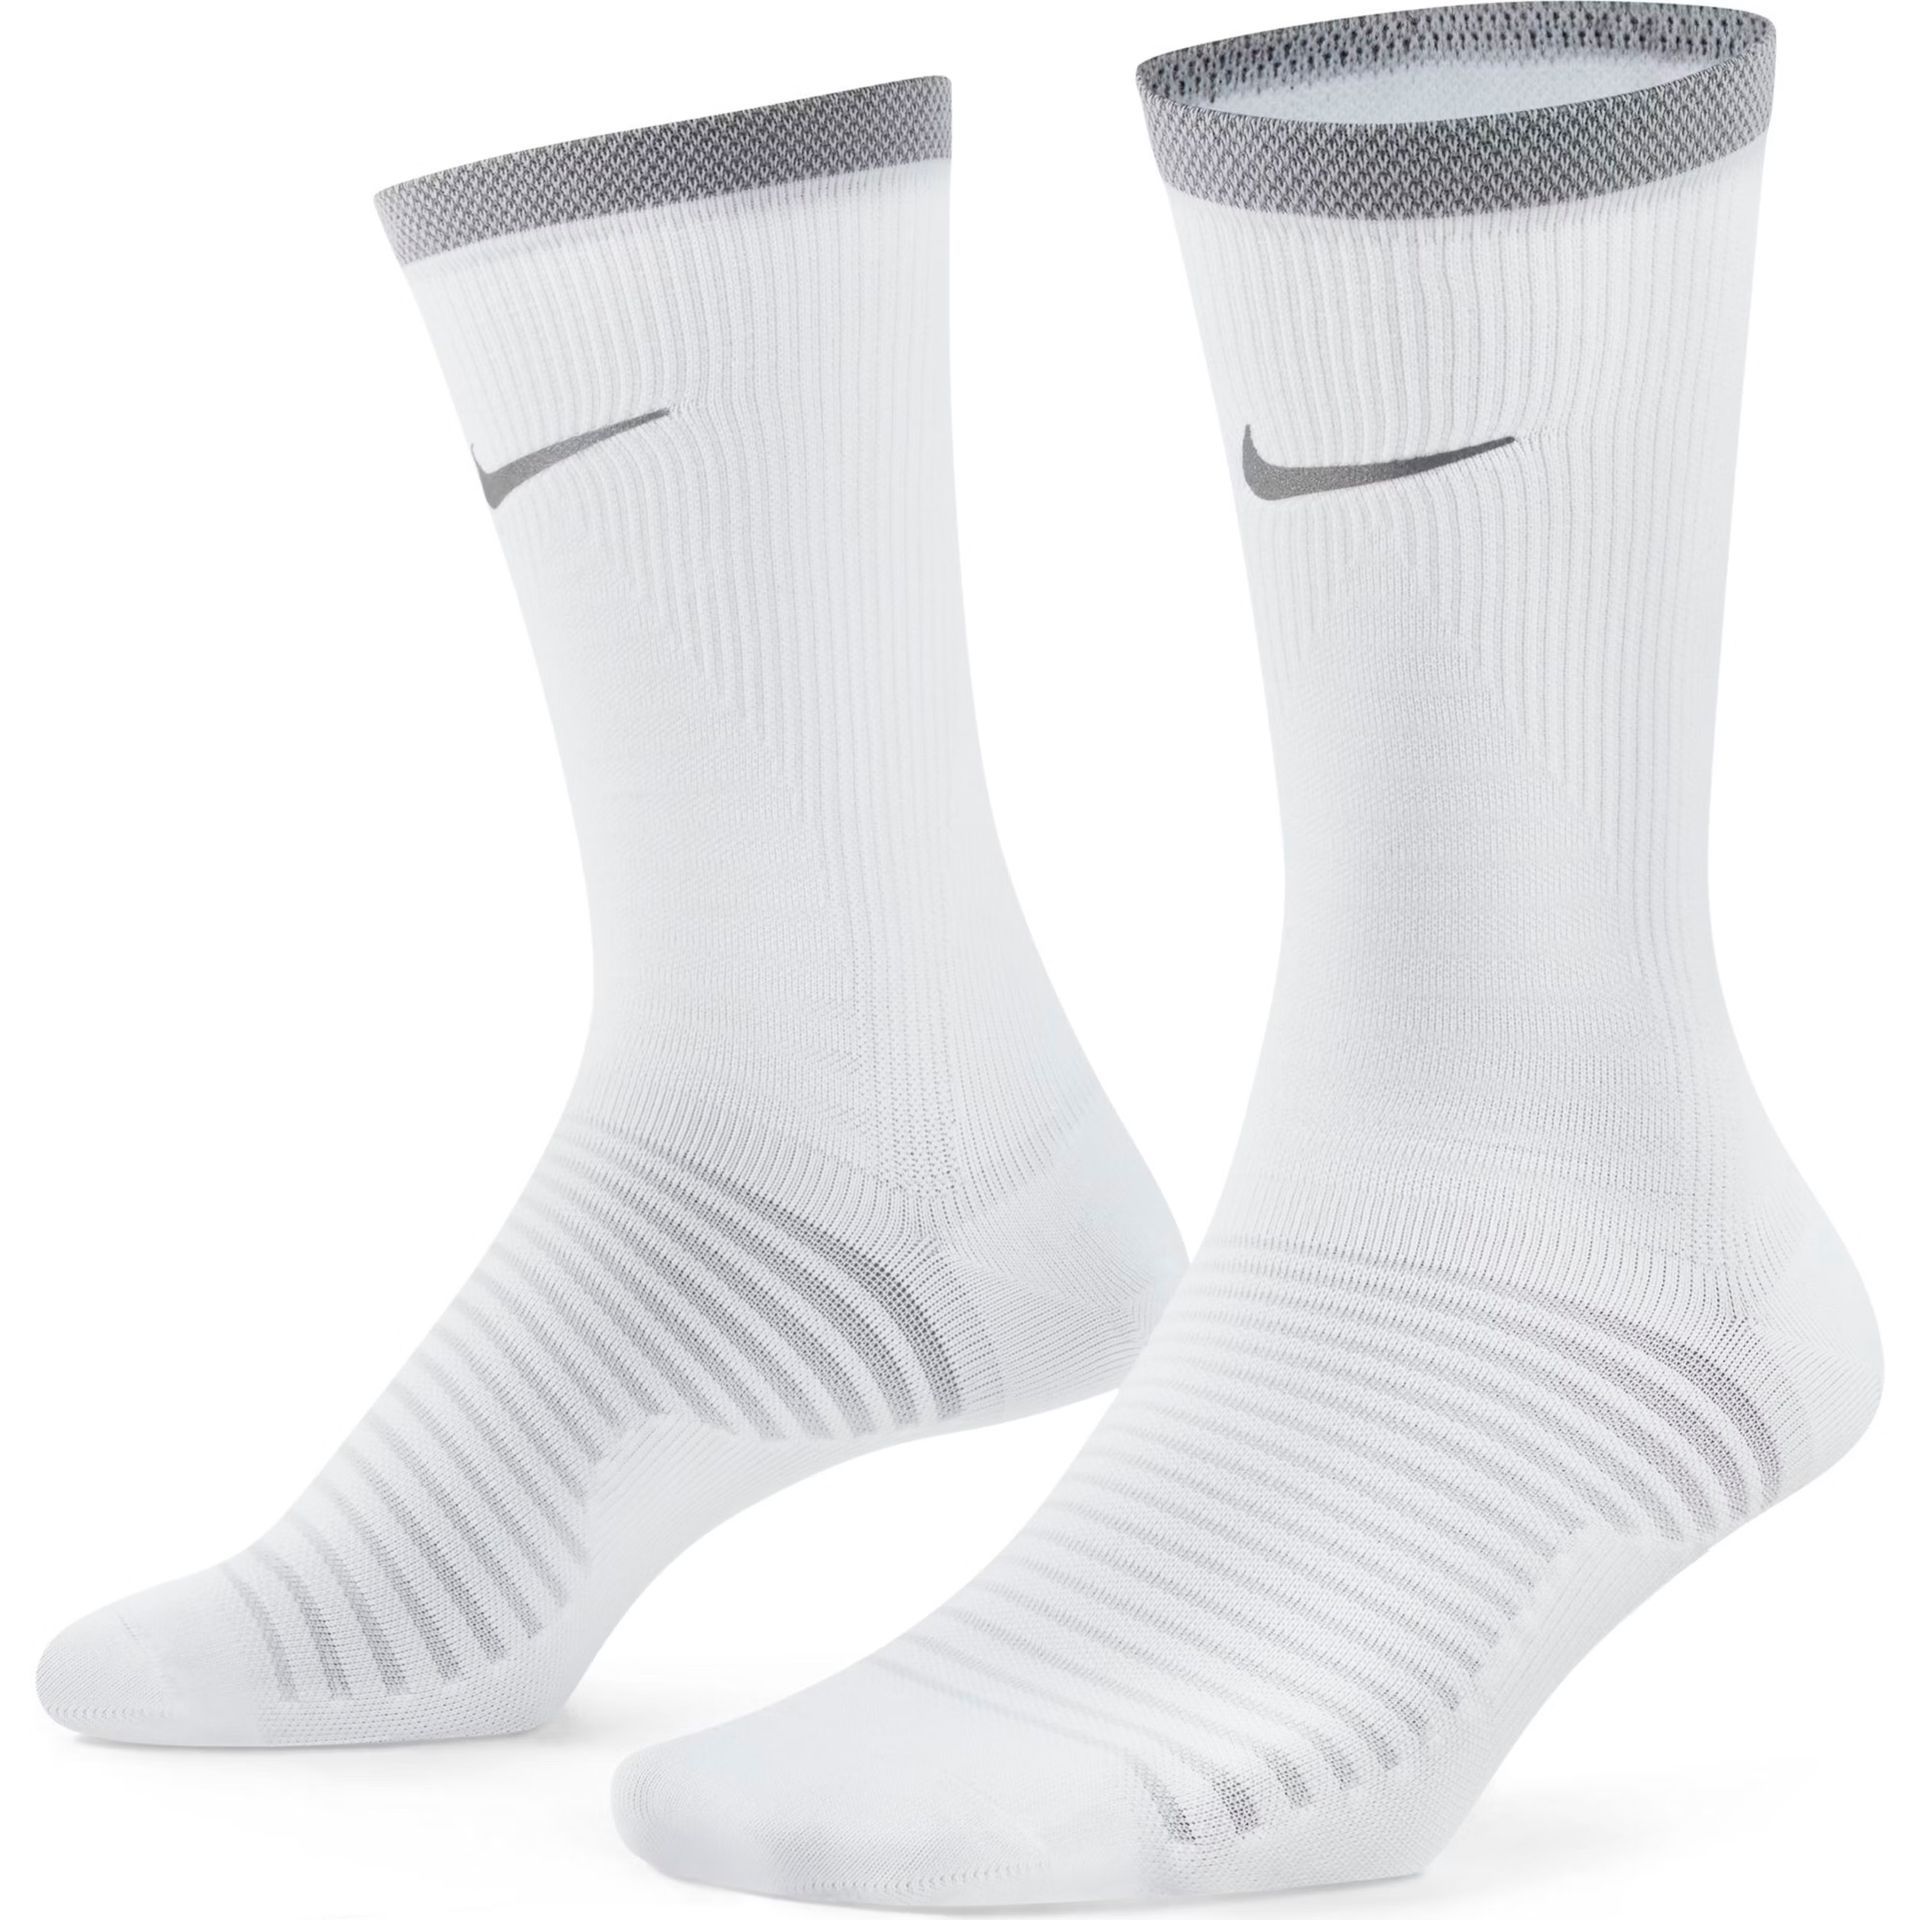 A pair of white nike socks on a white background